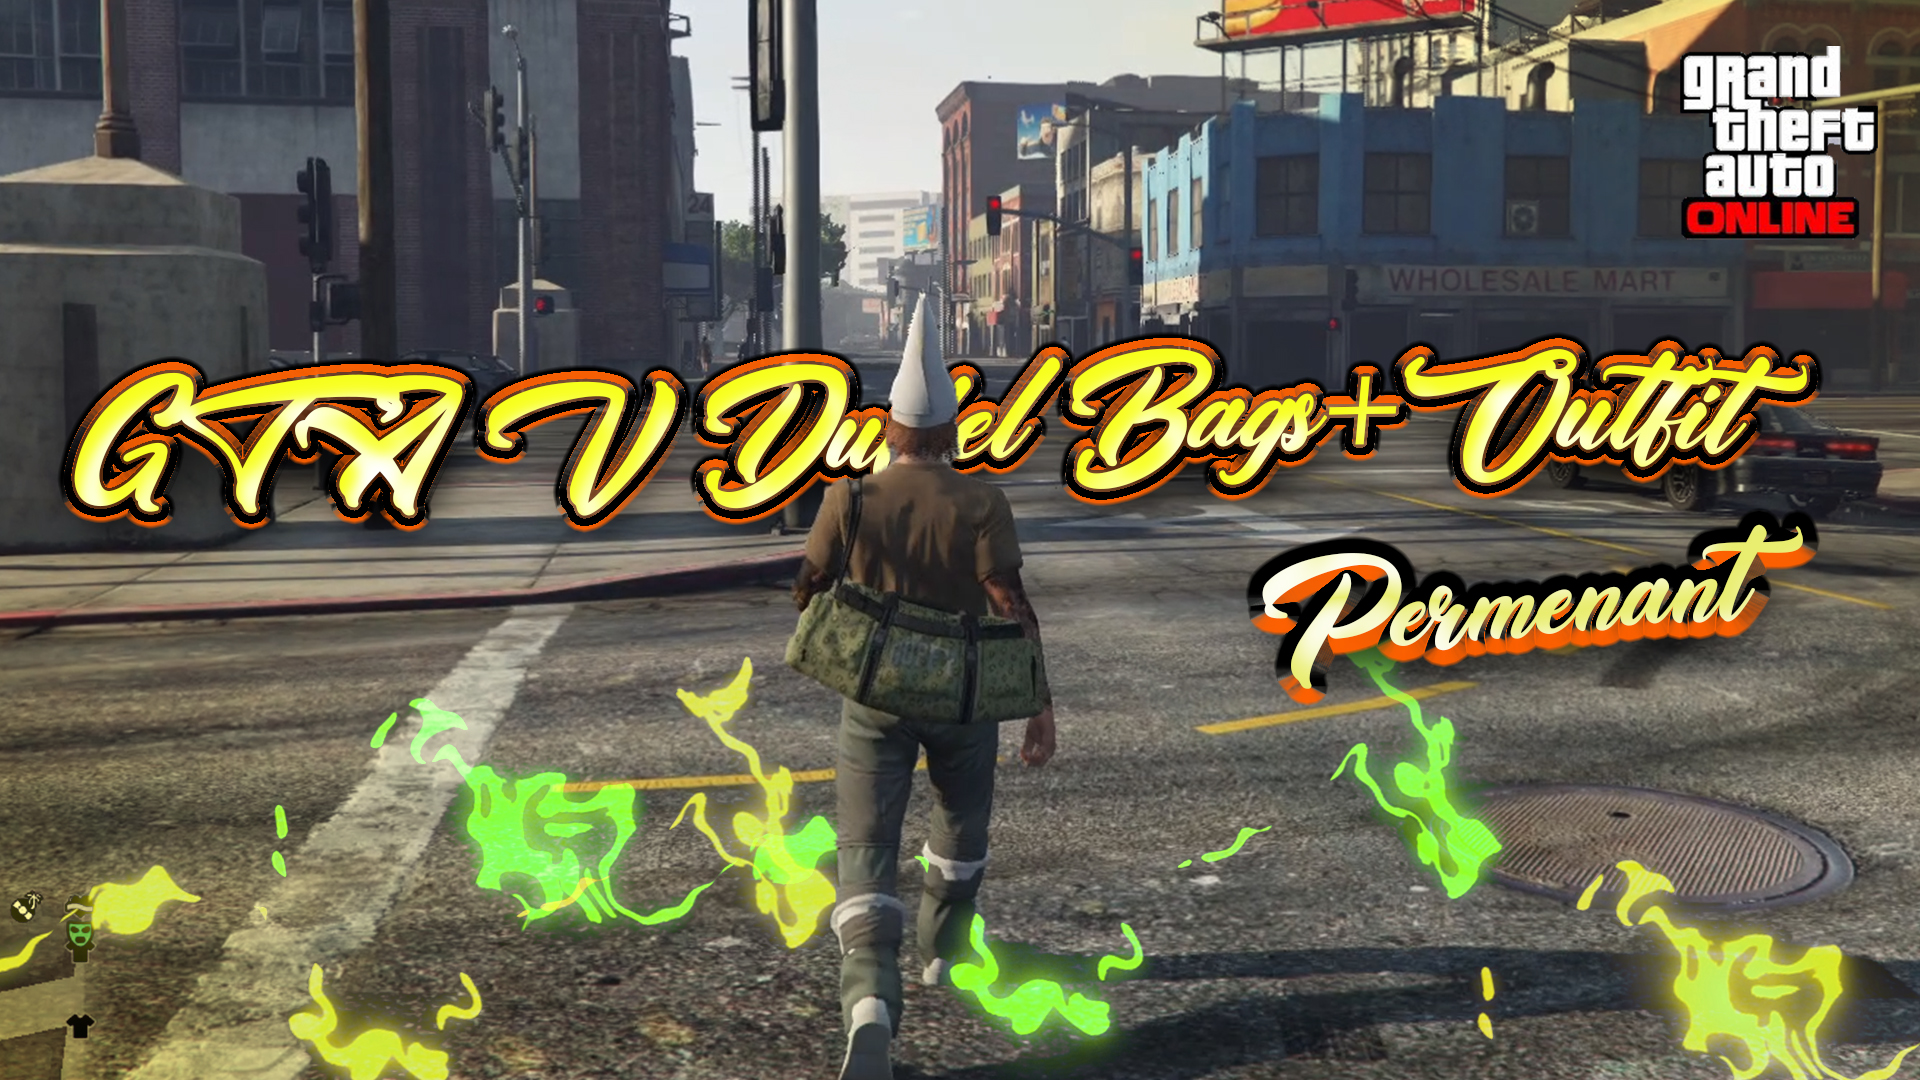 GTA V Online Duffle Bags + Outfits Save Permanent With External Menu 100%  Safe Undetected Free XDevOutfit Editor